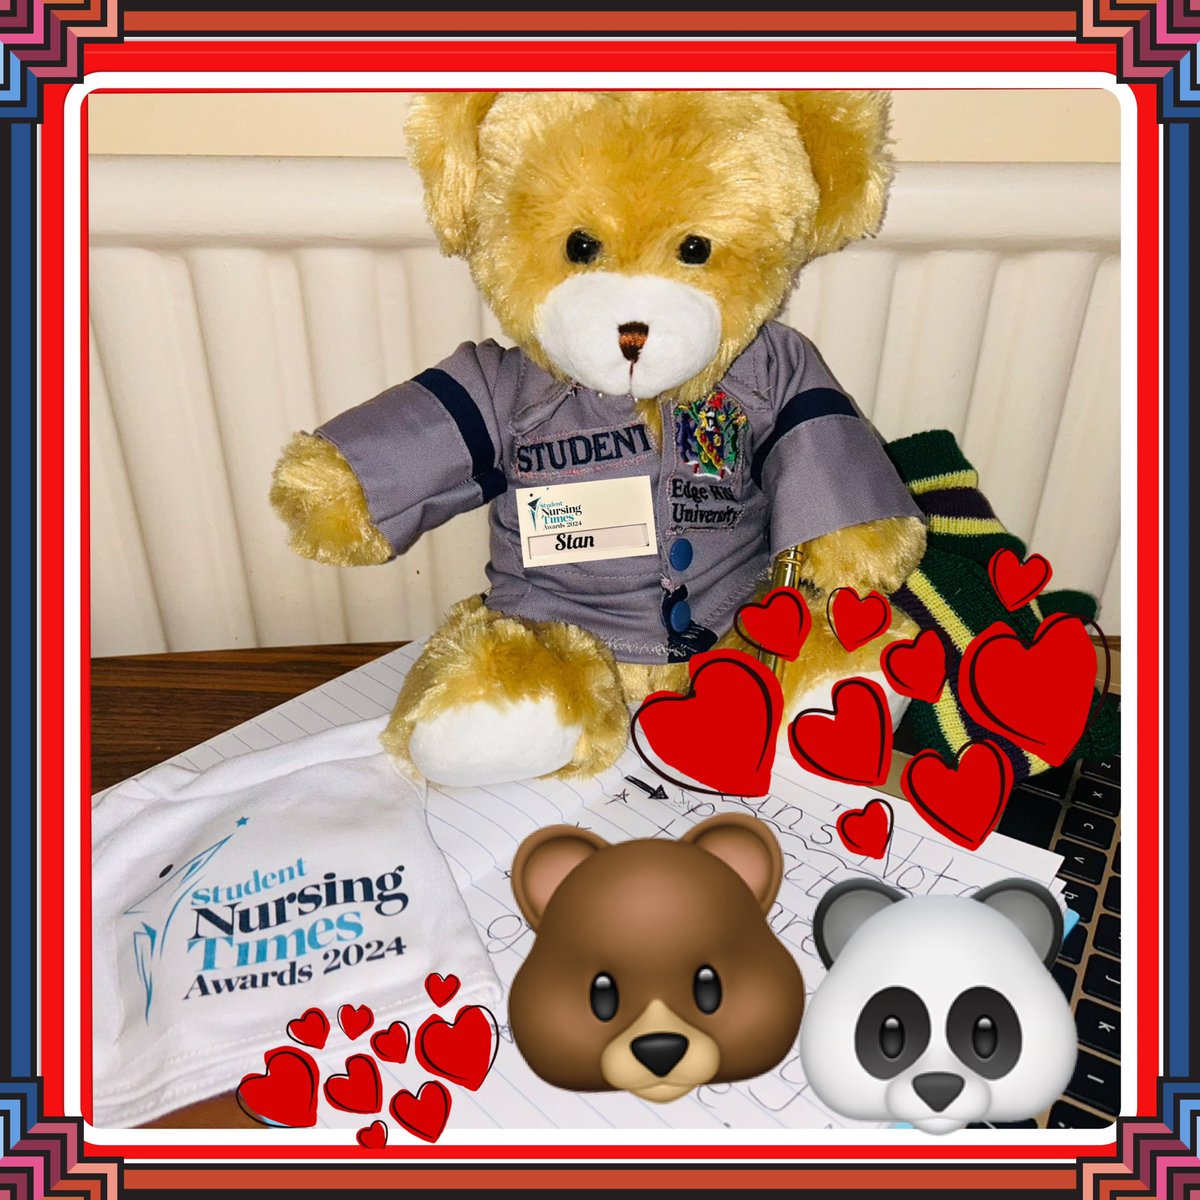 Tonight Stan bear is thinking about the #SNTA and looking forward to seeing friends there, nice to have relaxing thoughts after a busy day learning about equality, diversity and inclusion @NursingTimes #SNTABear